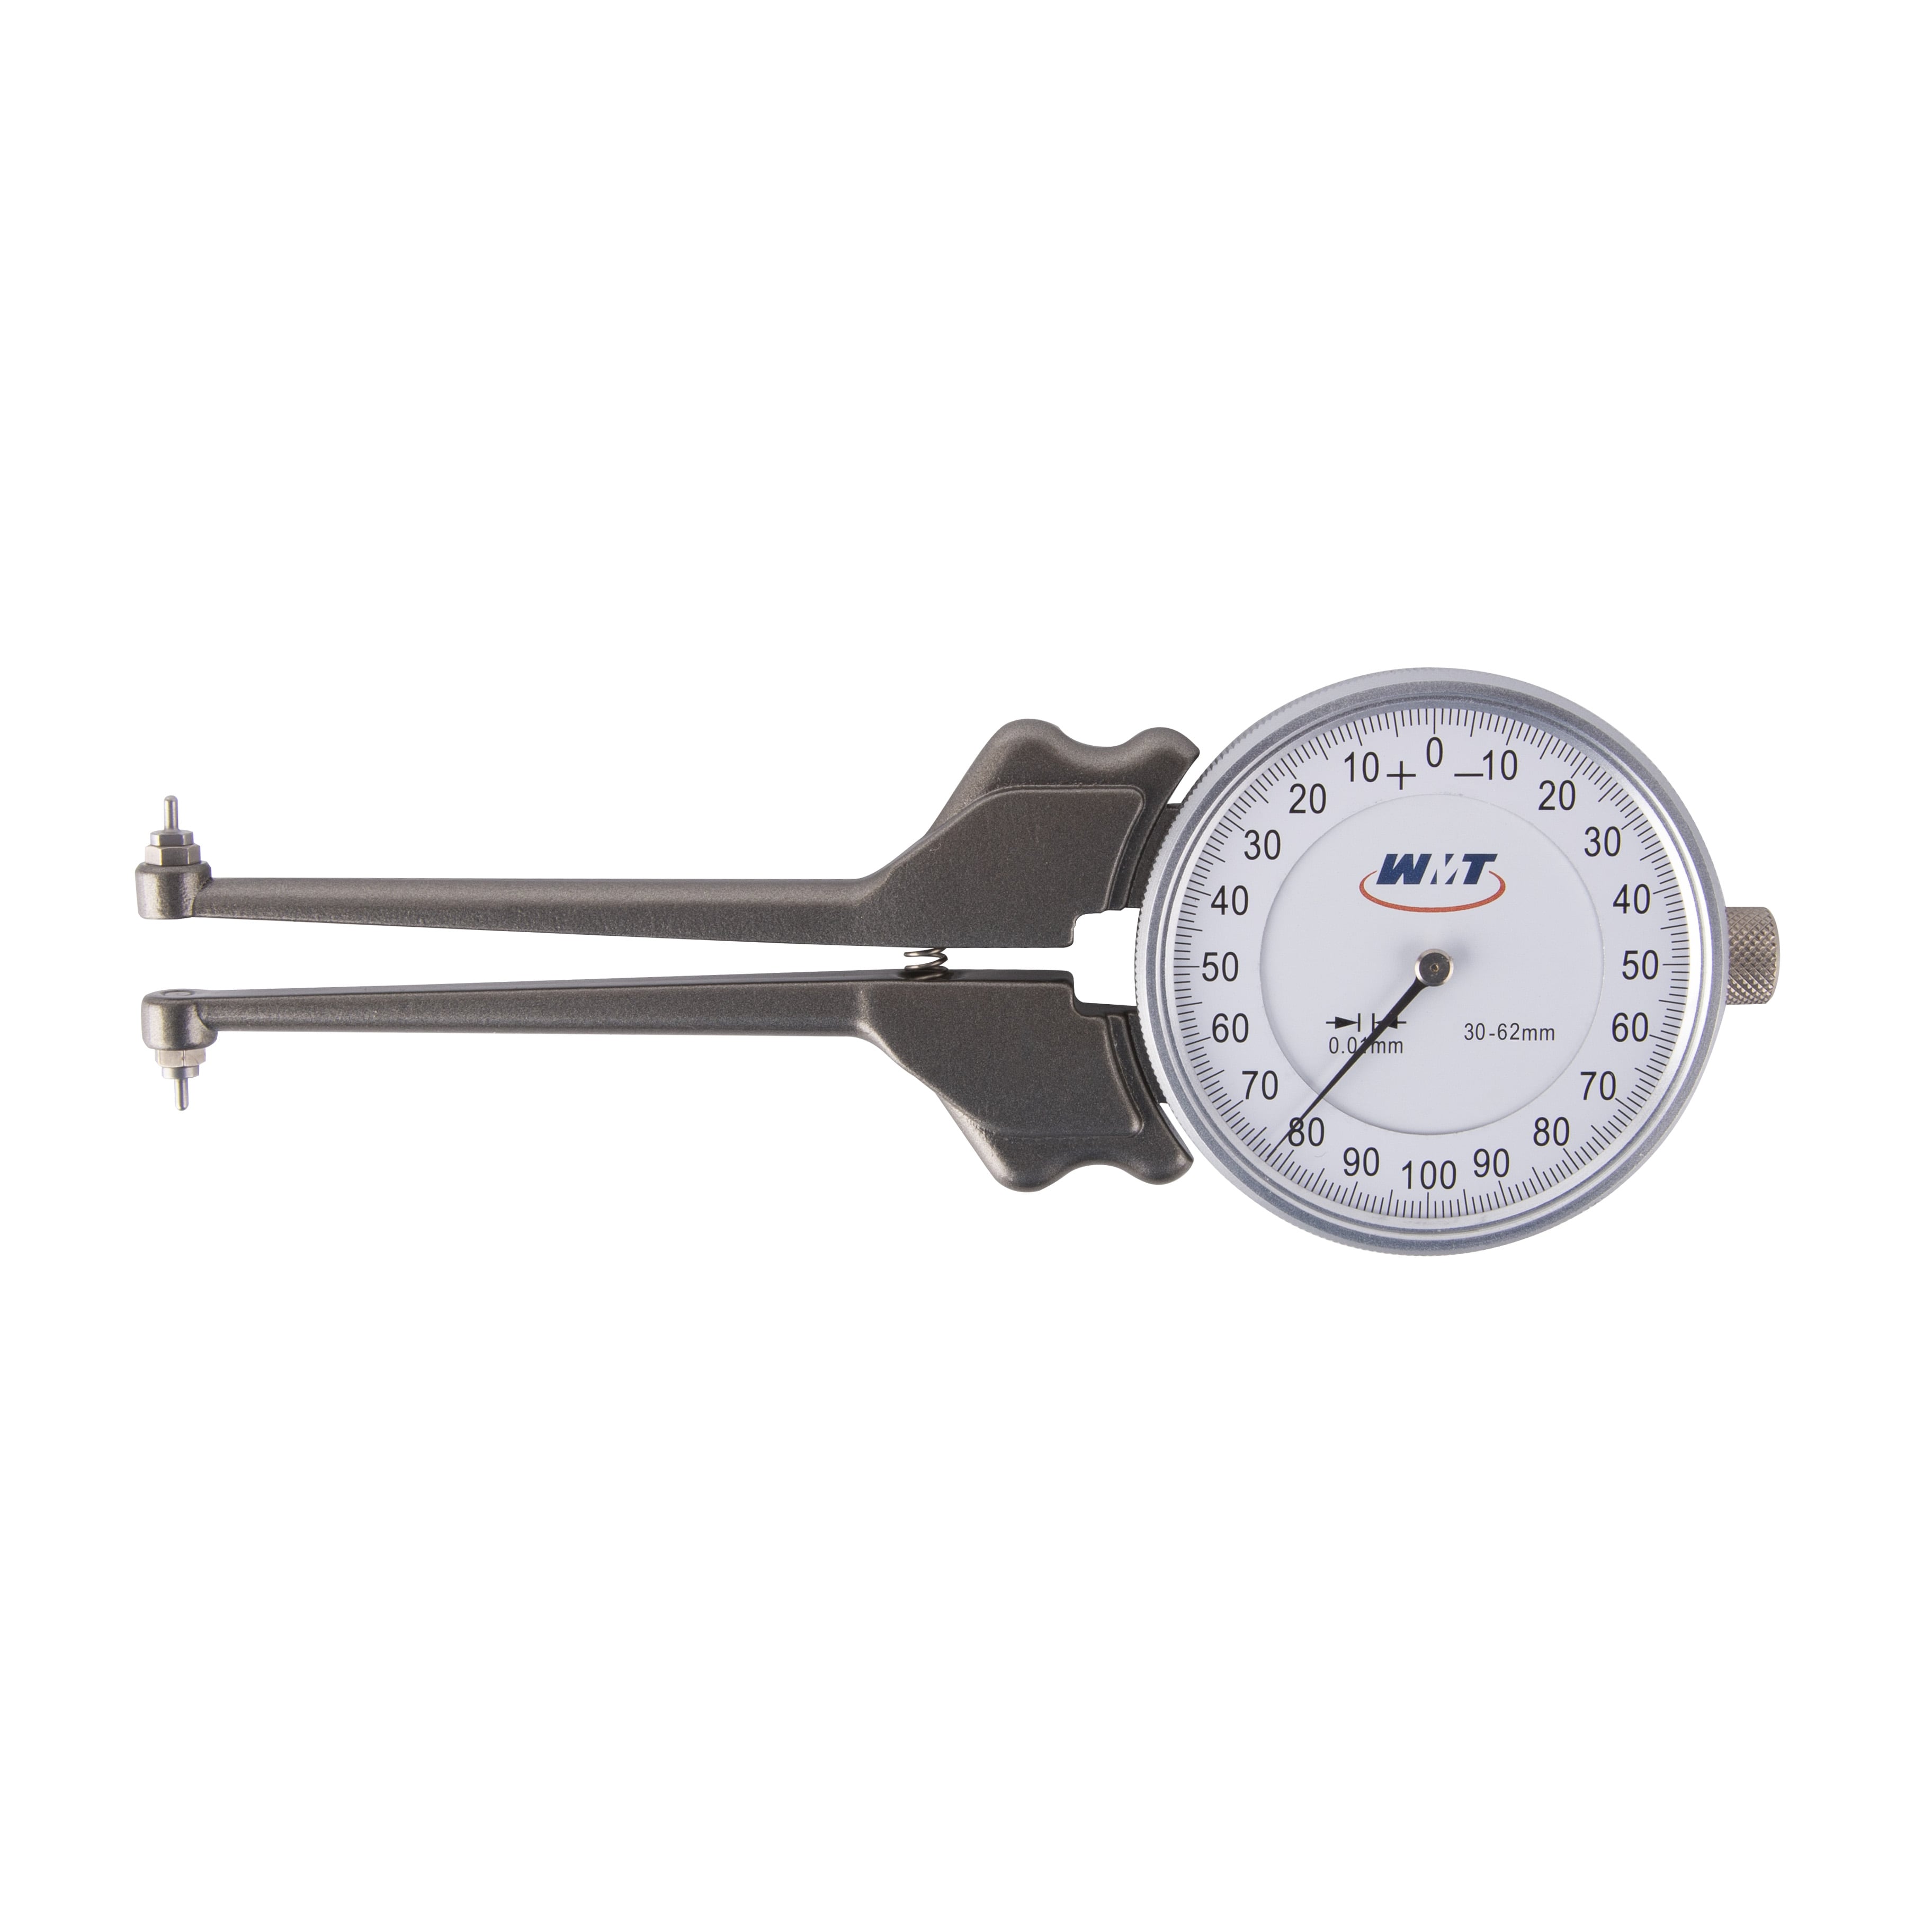 Inside Dial Caliper Gauges With Anvils